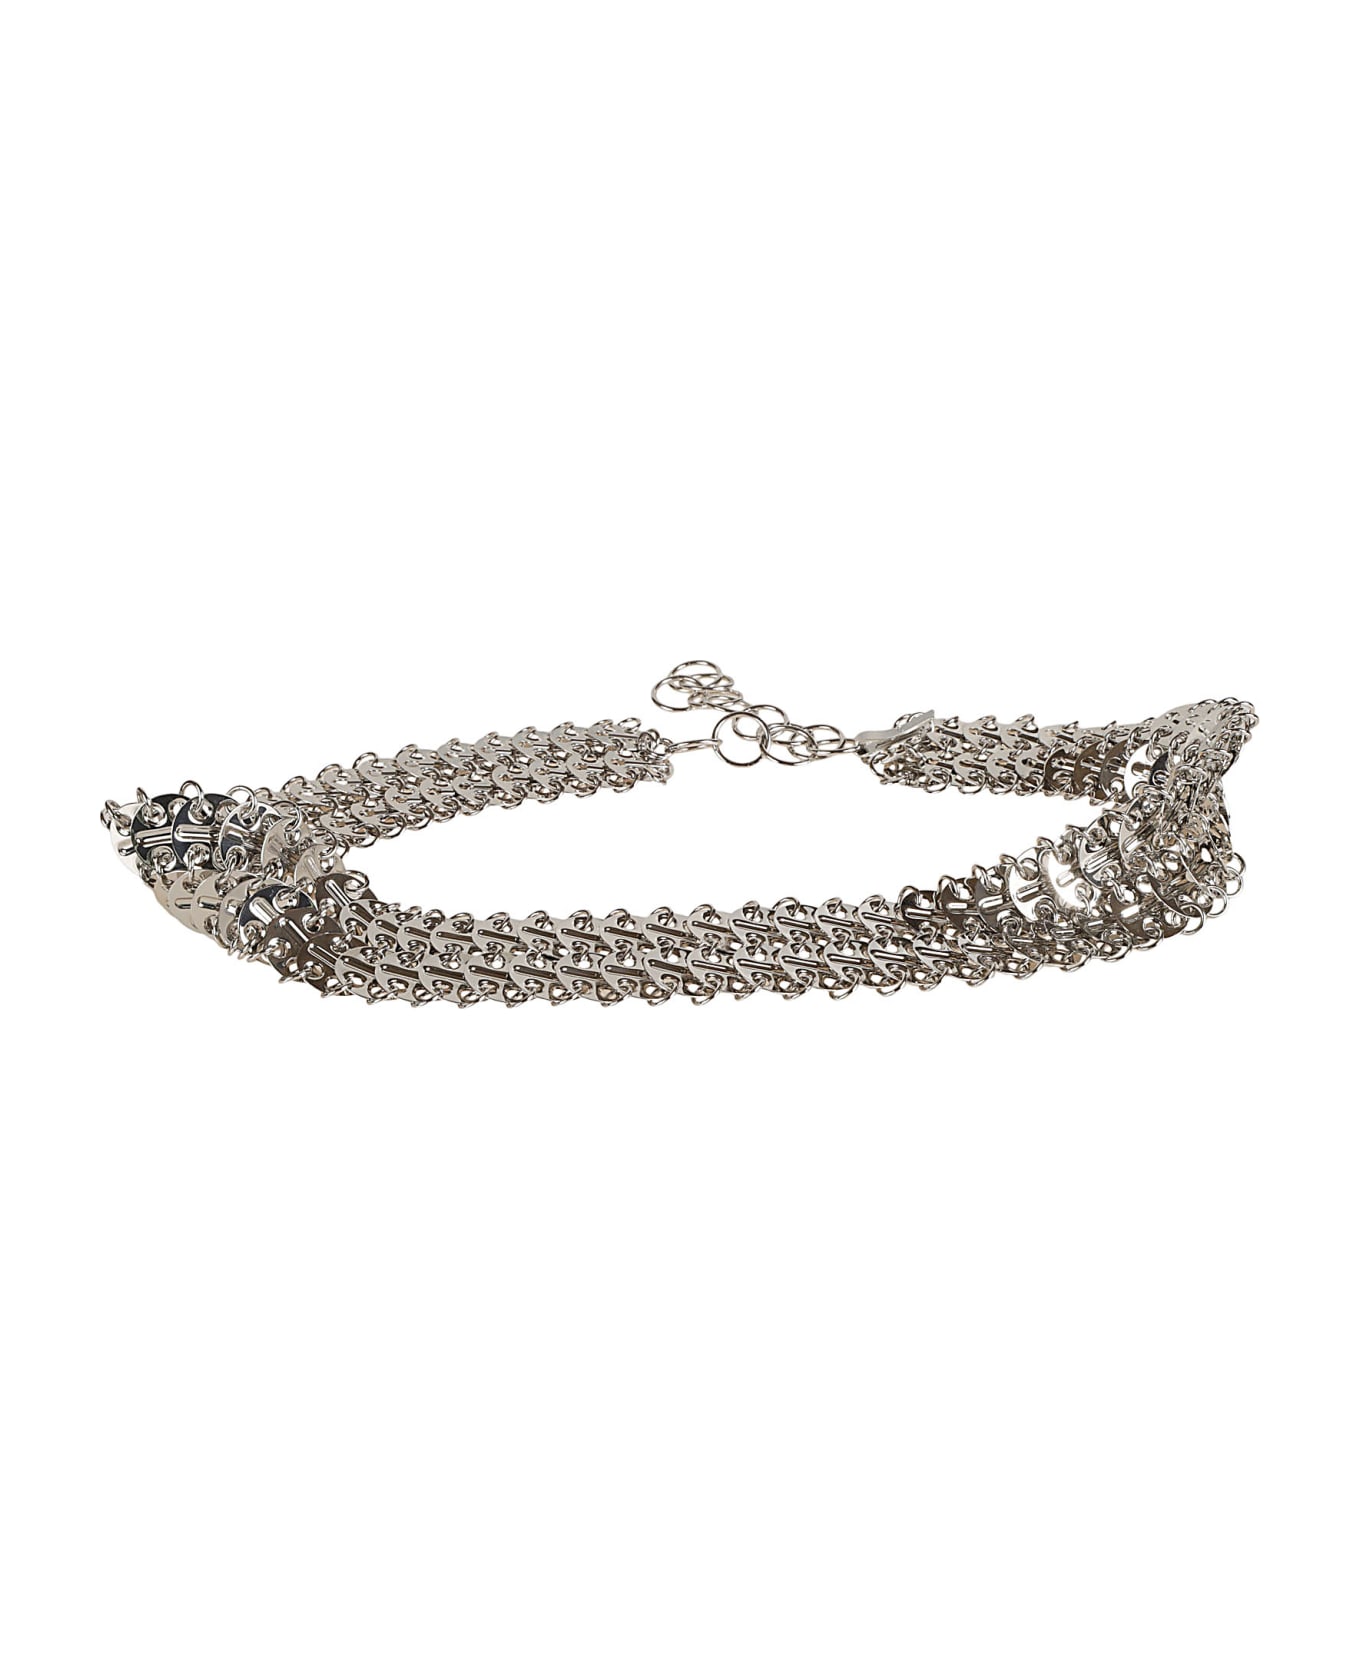 Paco Rabanne Chainmail Bracelet - Silver